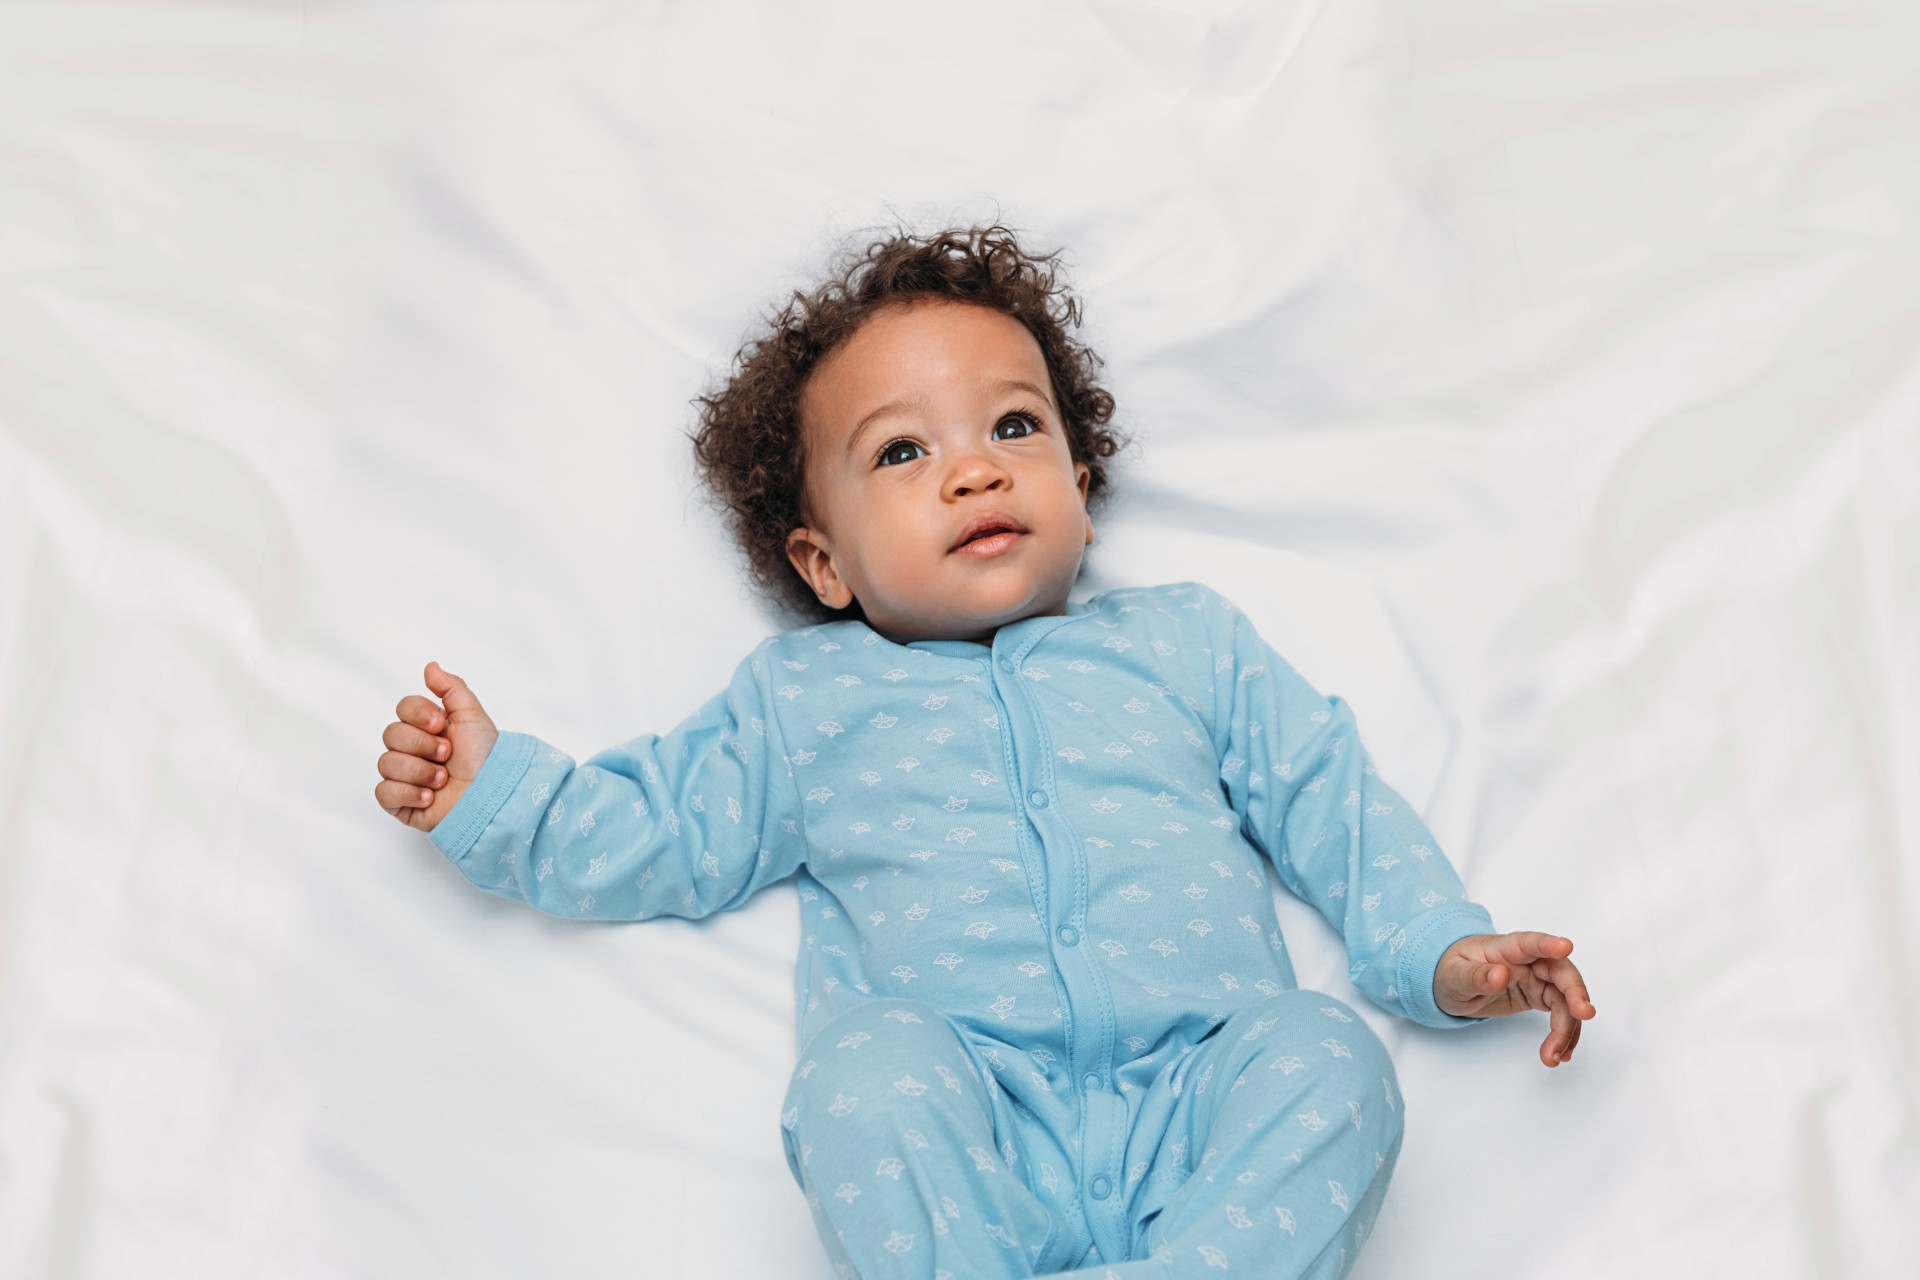 Baby wearing a blue pajama laying in a bed with white sheets.